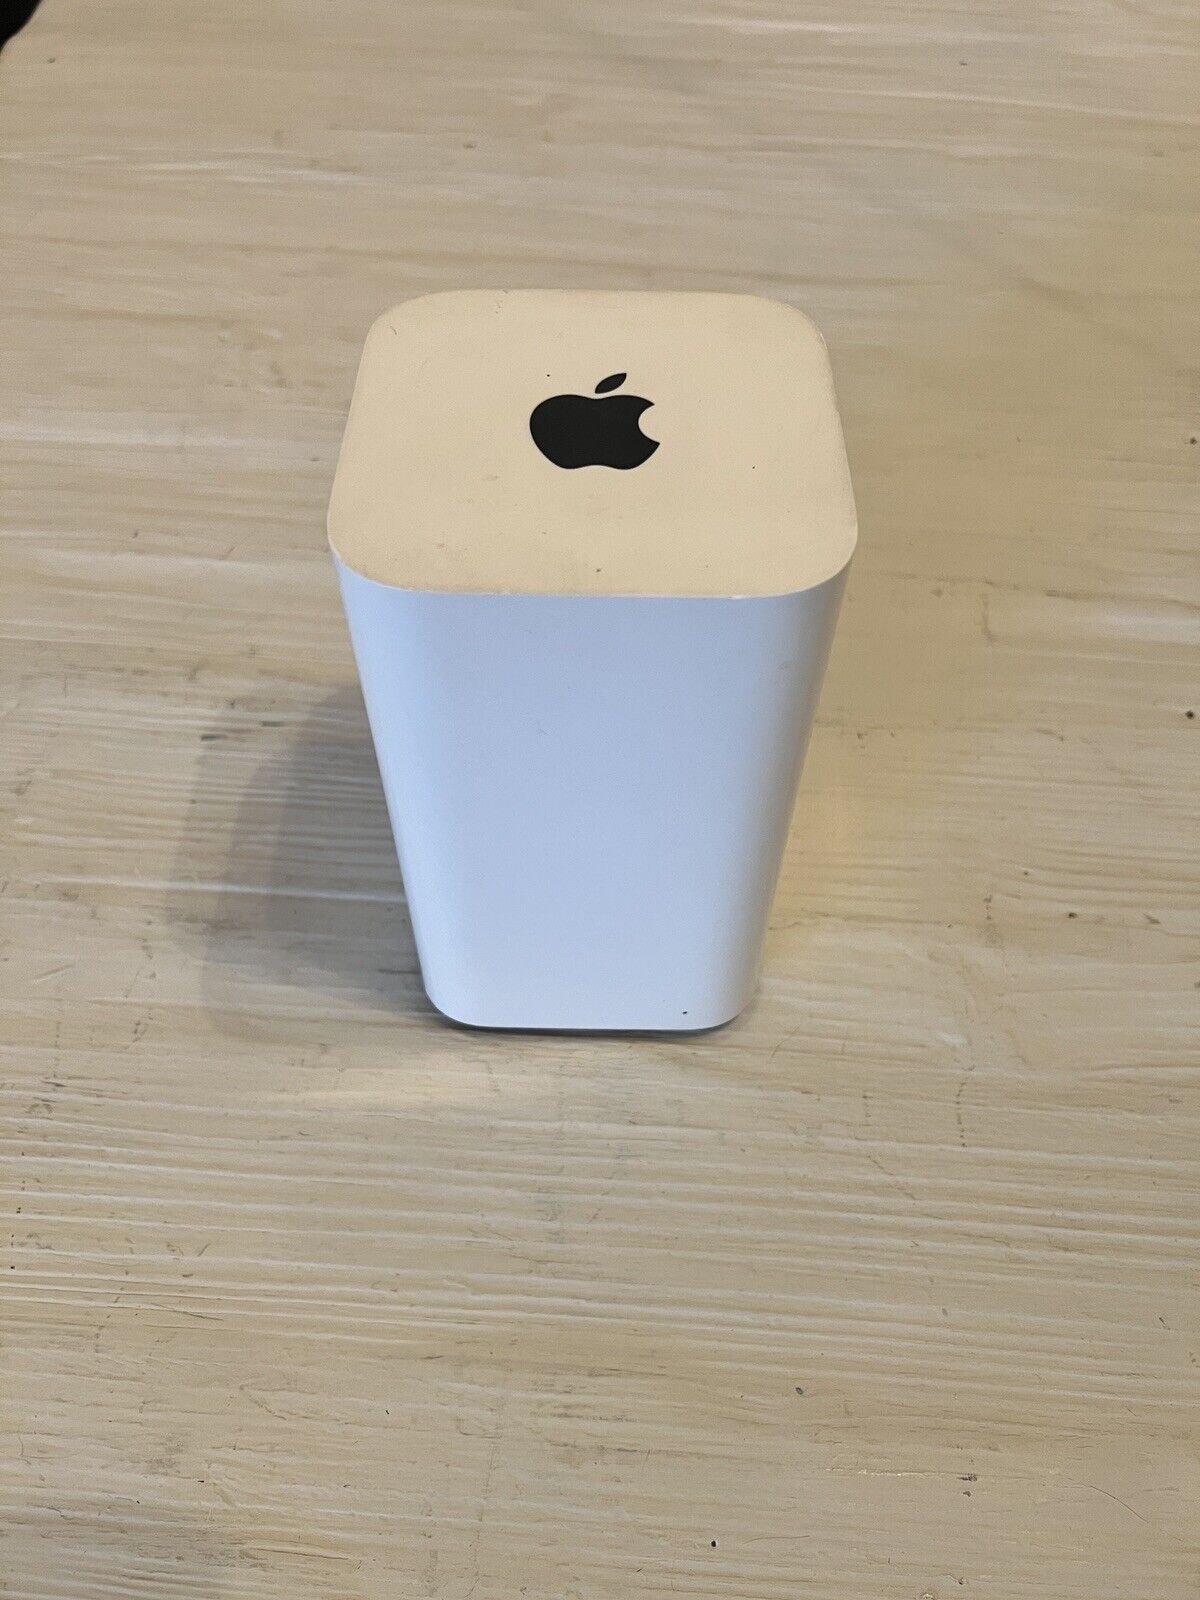 Apple A1521 AirPort Extreme Base Station Wireless Router - Used